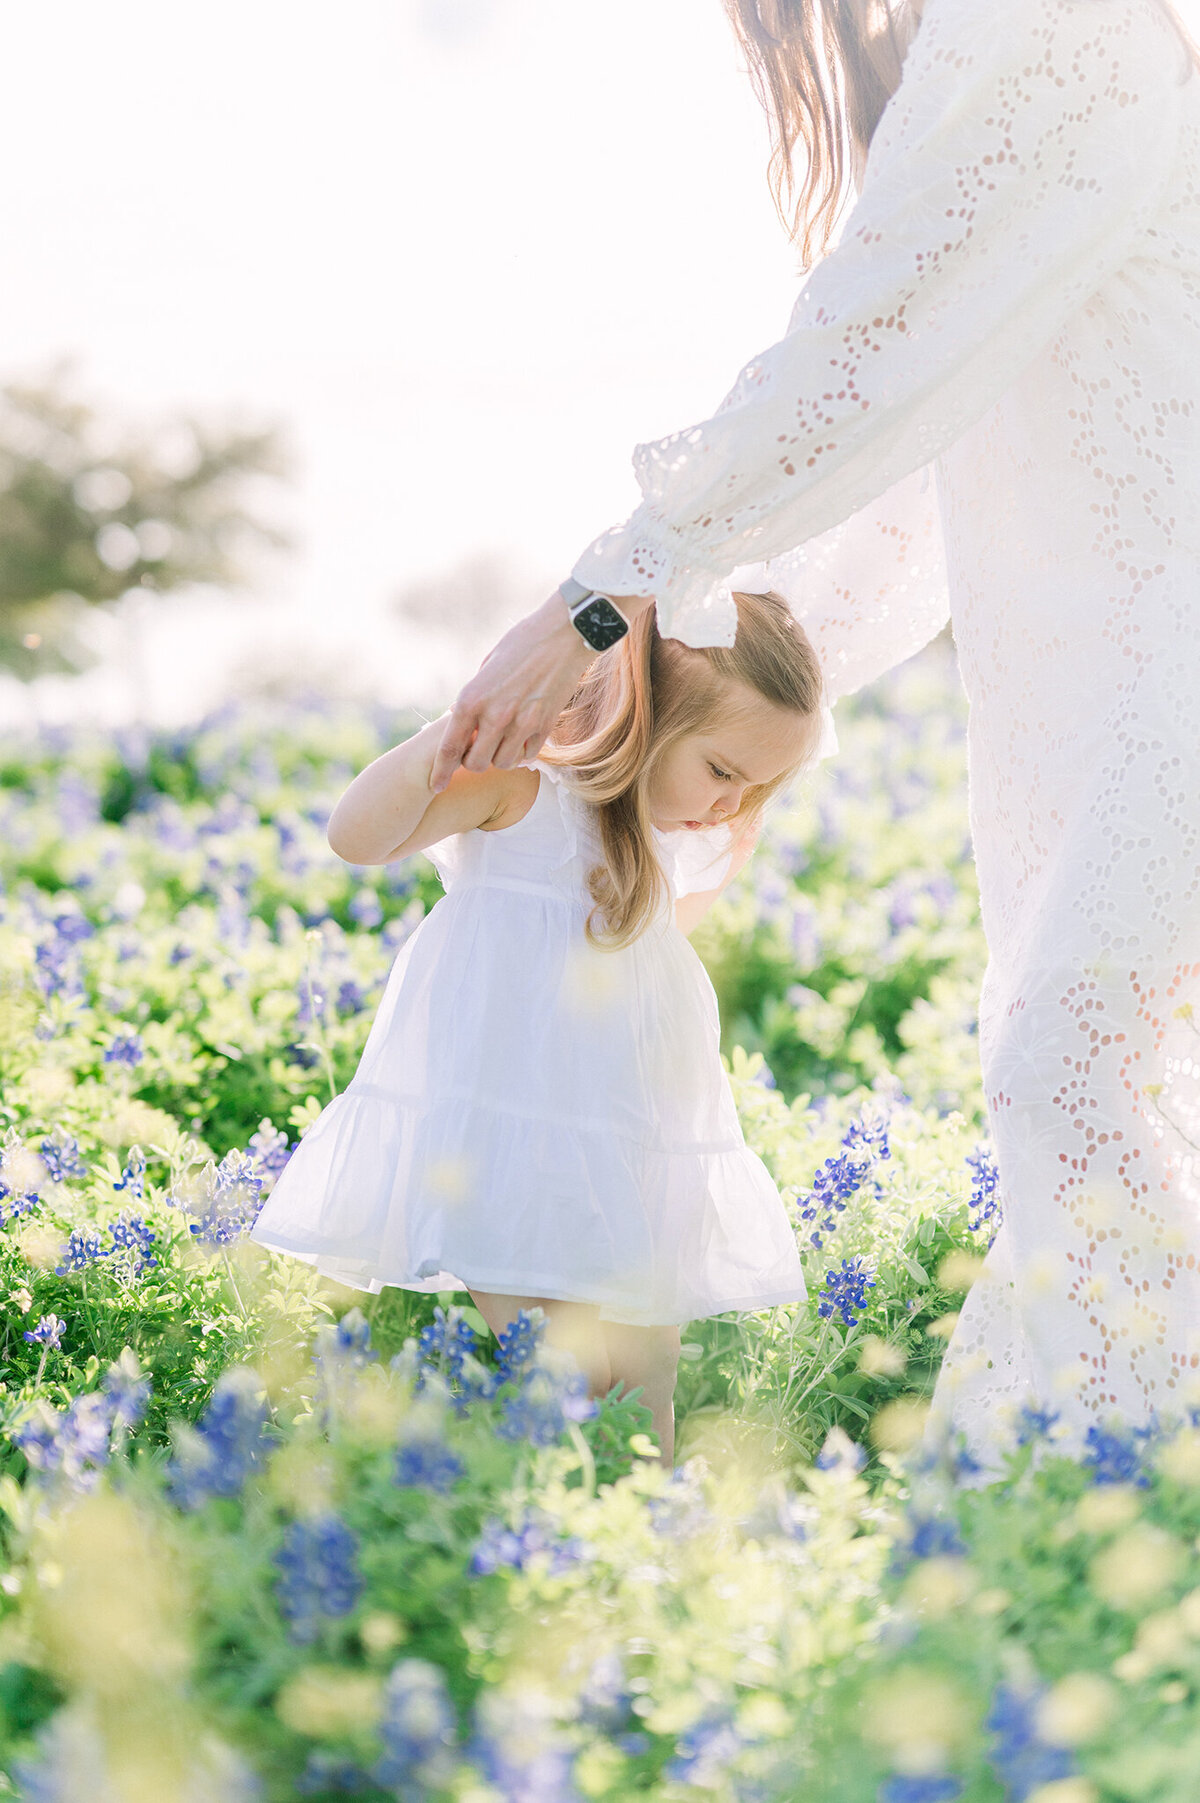 Mother dancing with daughter in a field of bluebonnets.